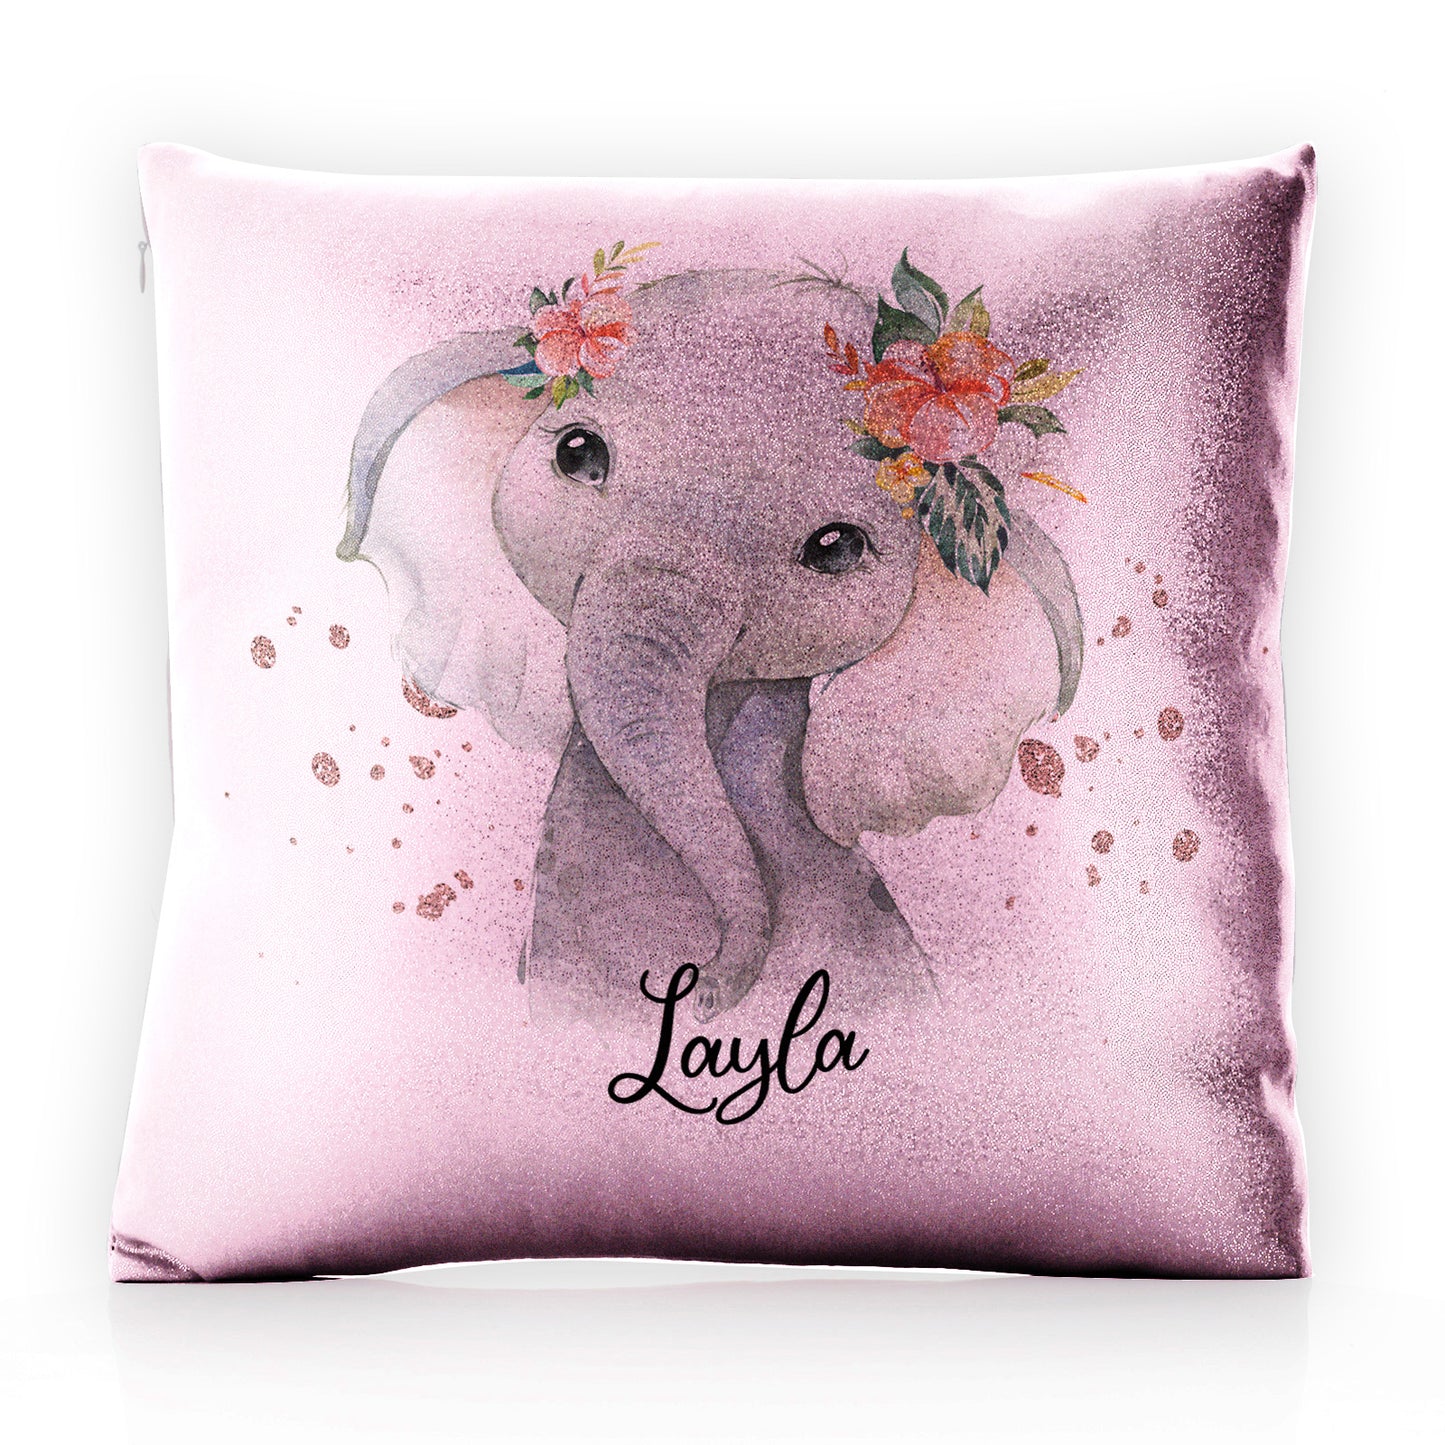 Personalised Glitter Cushion with Elephant Rain Drop Glitter Print and Cute Text